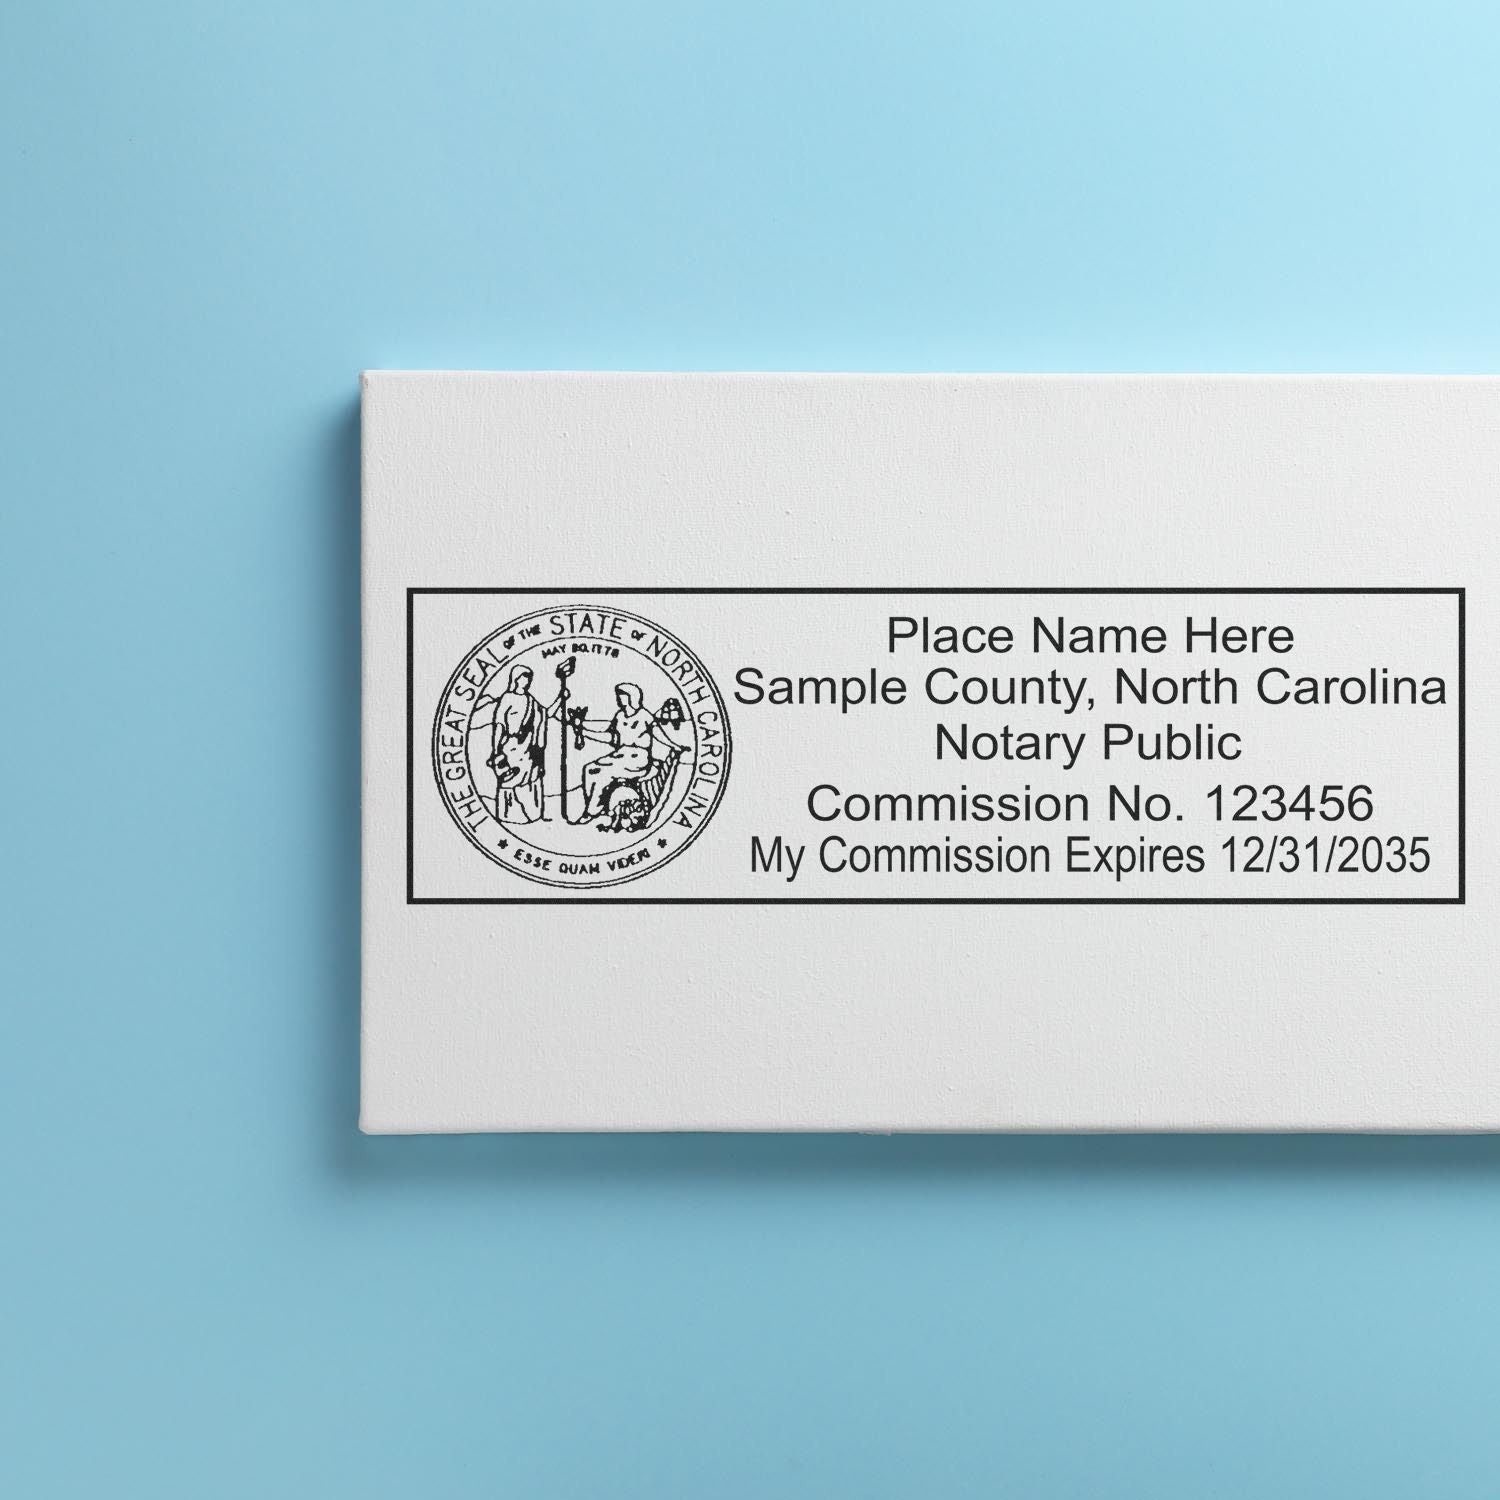 A lifestyle photo showing a stamped image of the MaxLight Premium Pre-Inked North Carolina State Seal Notarial Stamp on a piece of paper